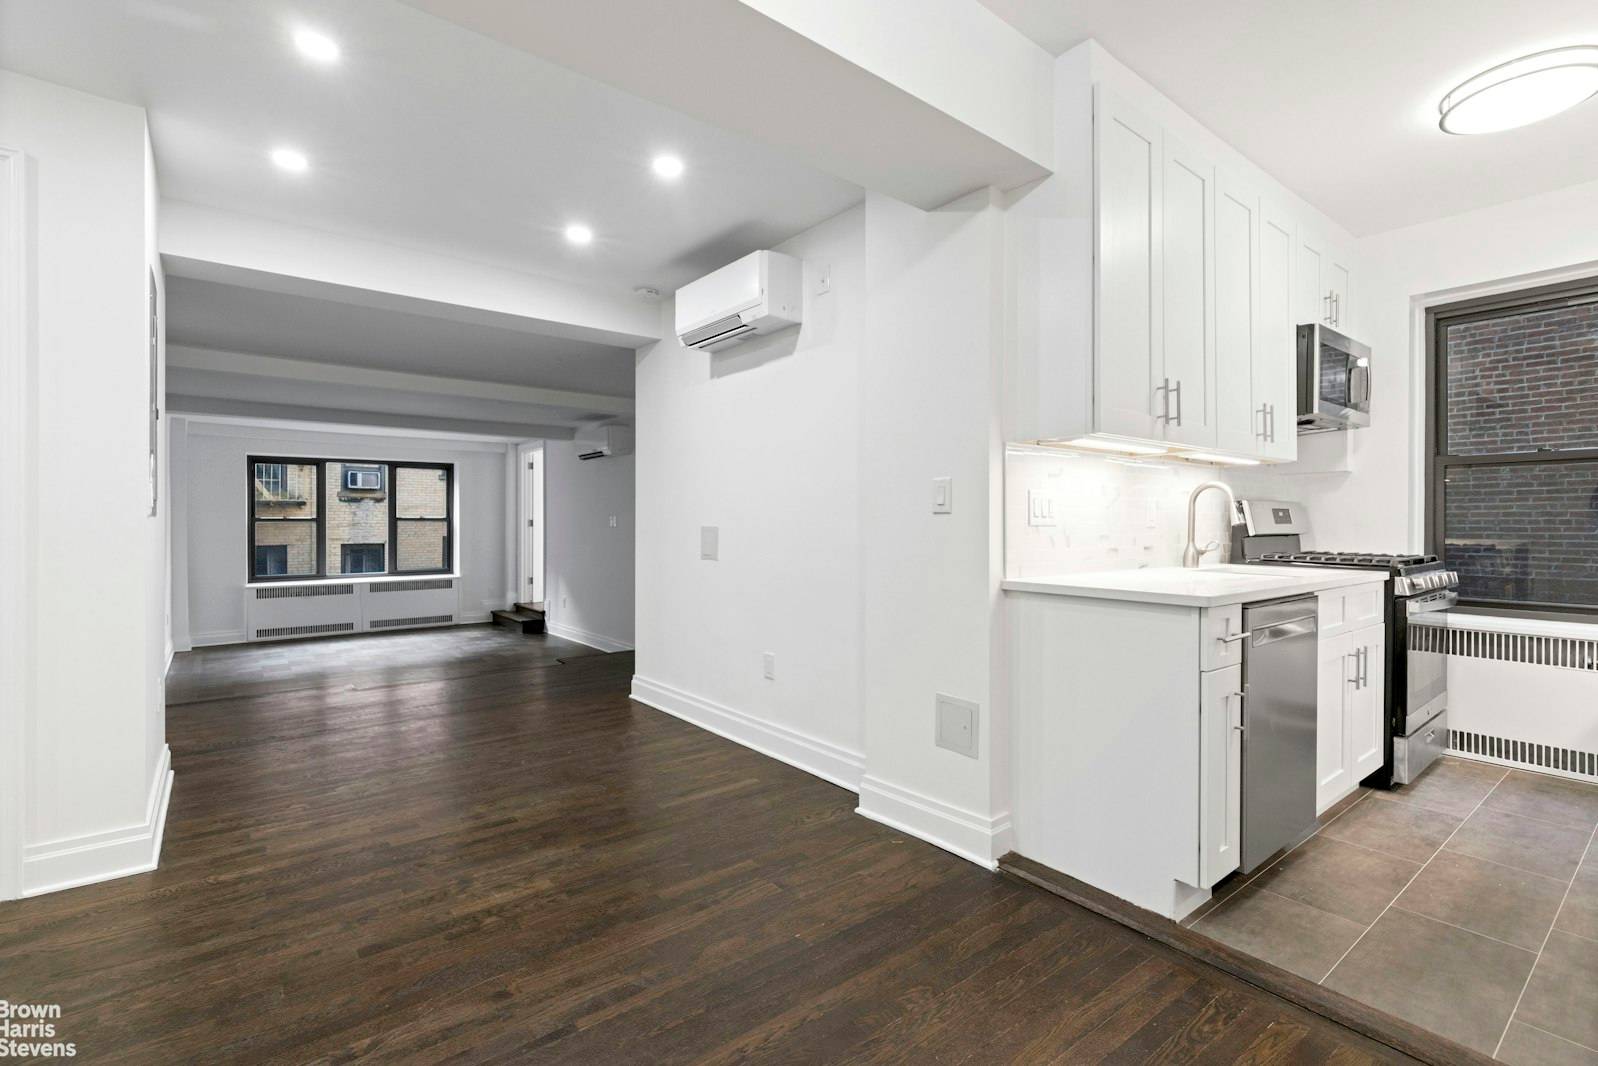 Don't miss the opportunity to live in this great building in the heart of Upper East Side.